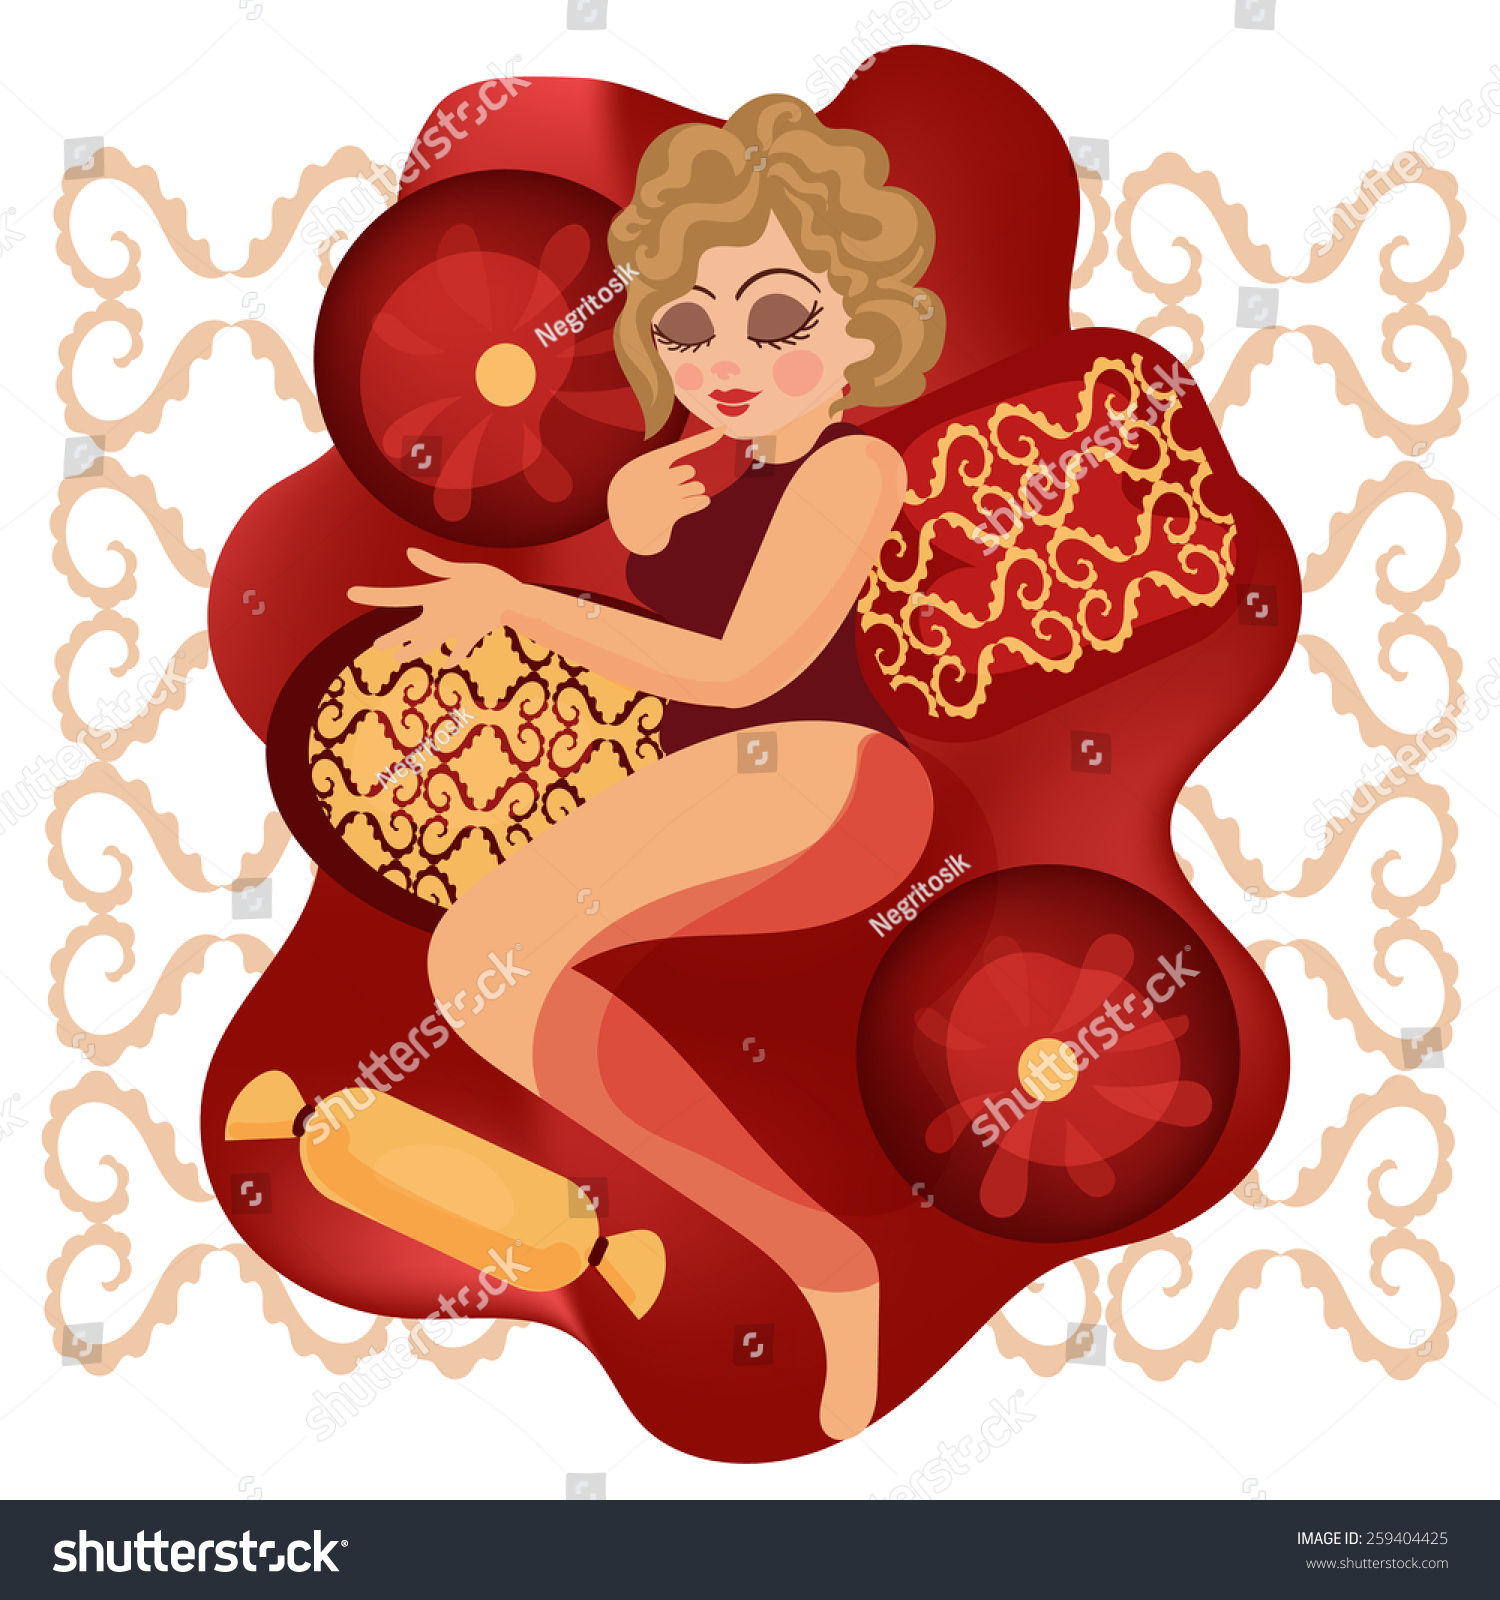 Sexy Girl Lying On Bed Stock Vector Royalty Free 259404425 Shutterstock 